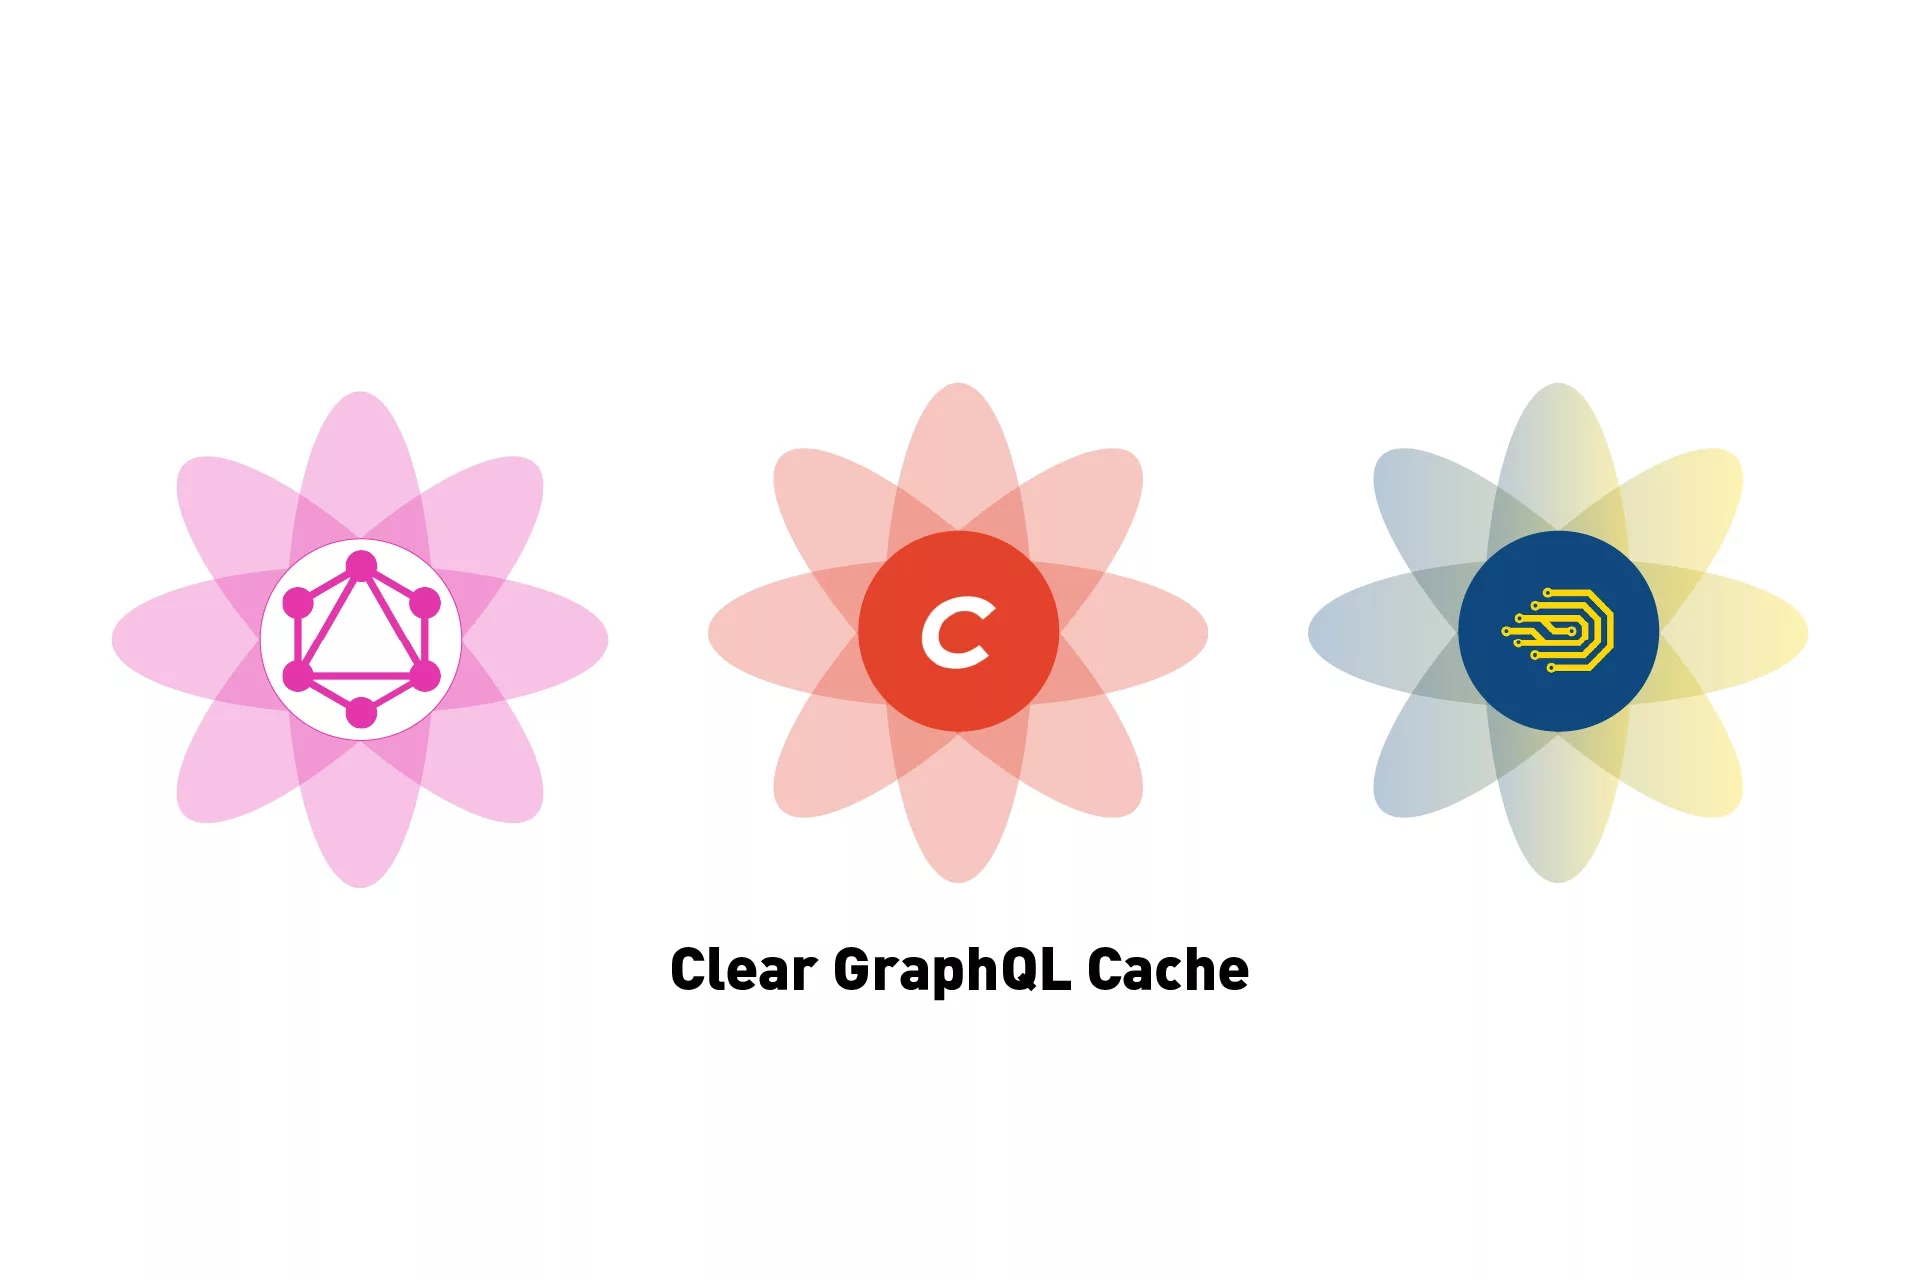 Three flowers that represent GraphQL, CraftCMS & DDEV side by side, with the text "Clear GraphQL Cache" beneath them.